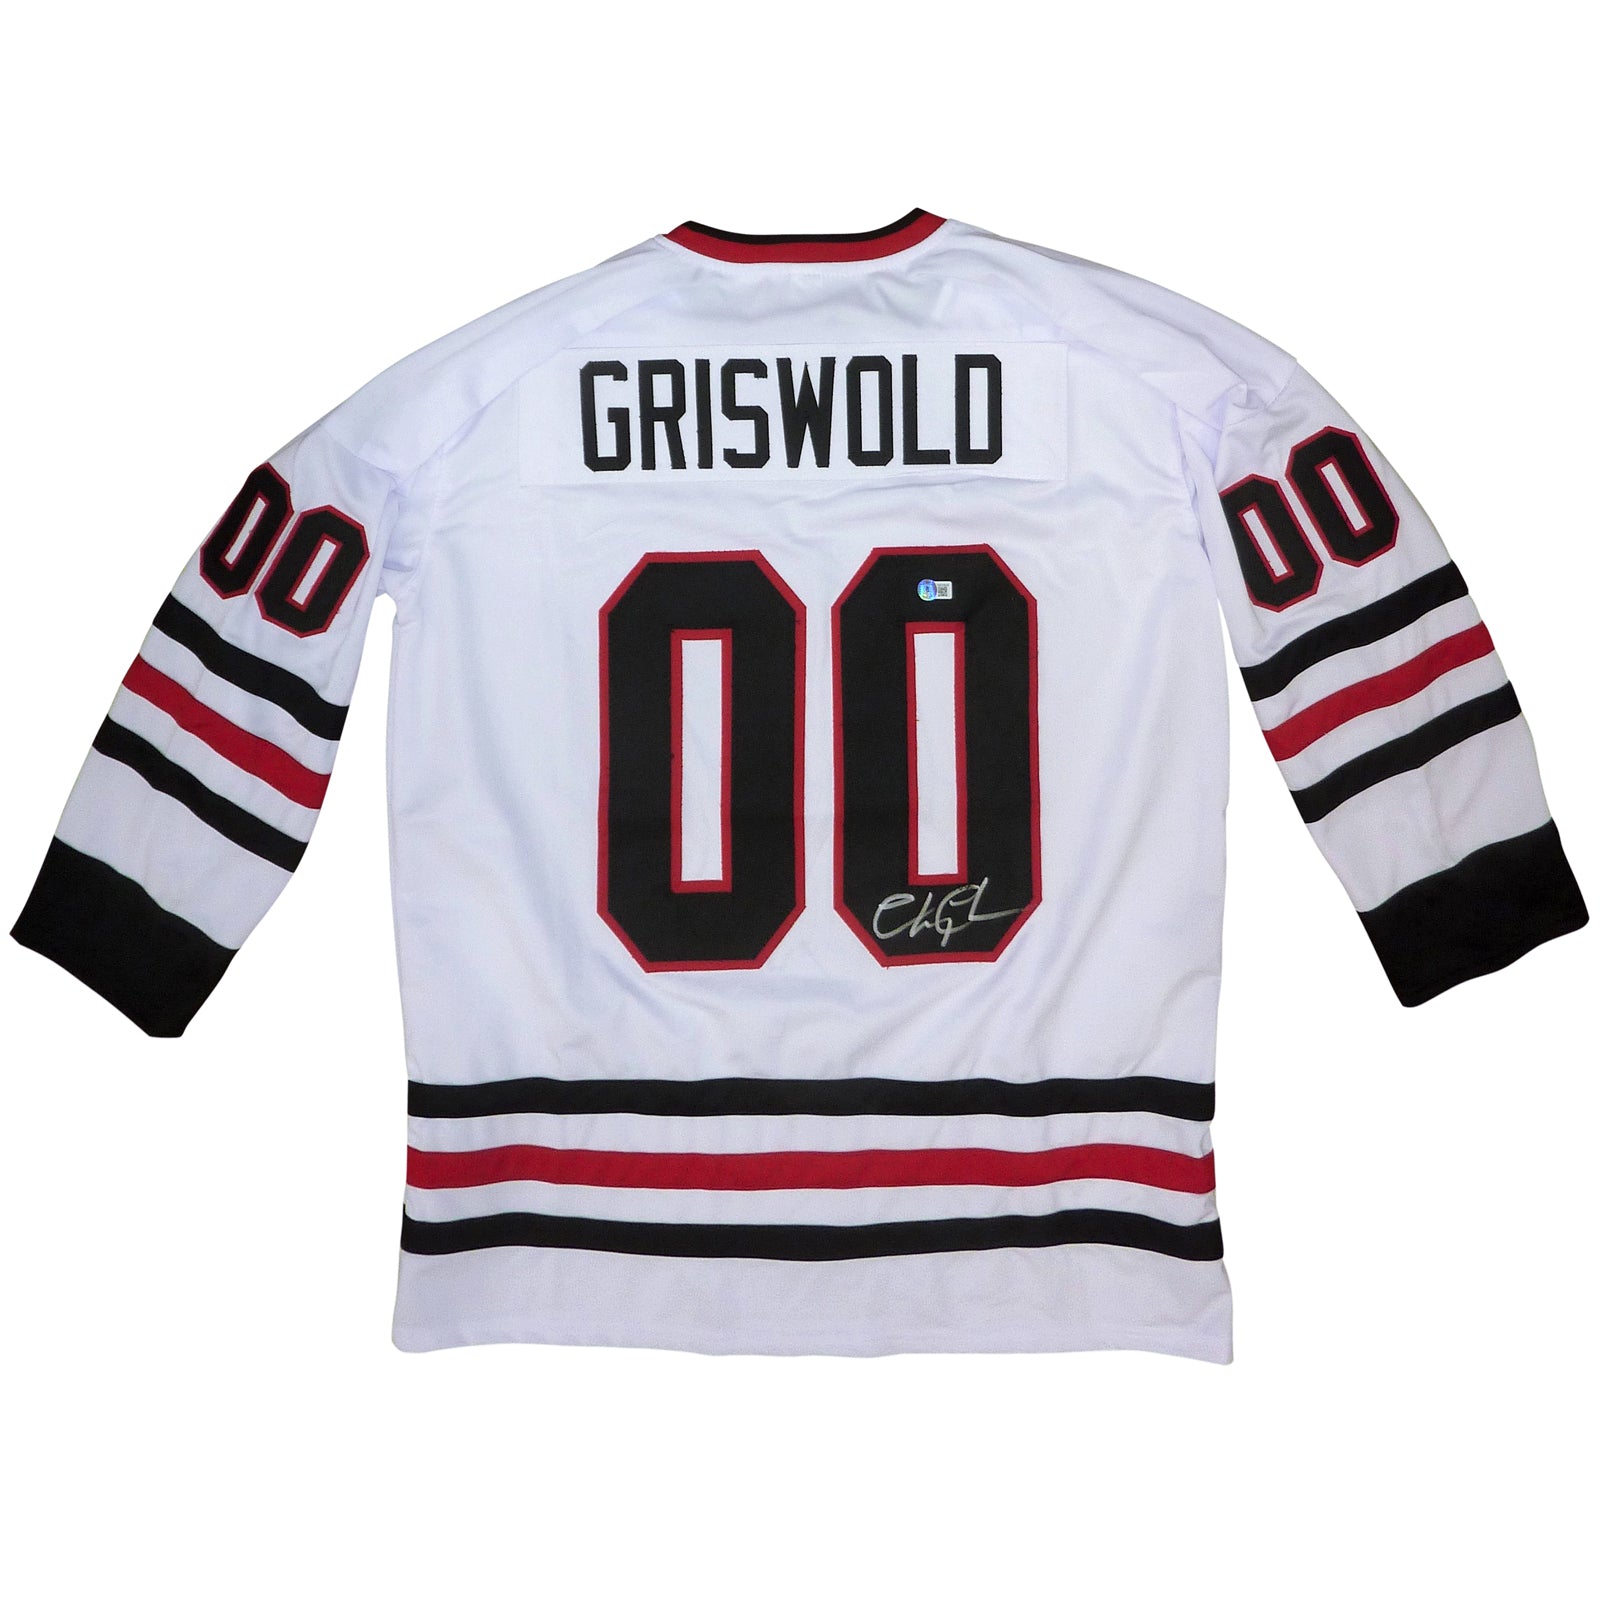  Griswold Hockey Jersey